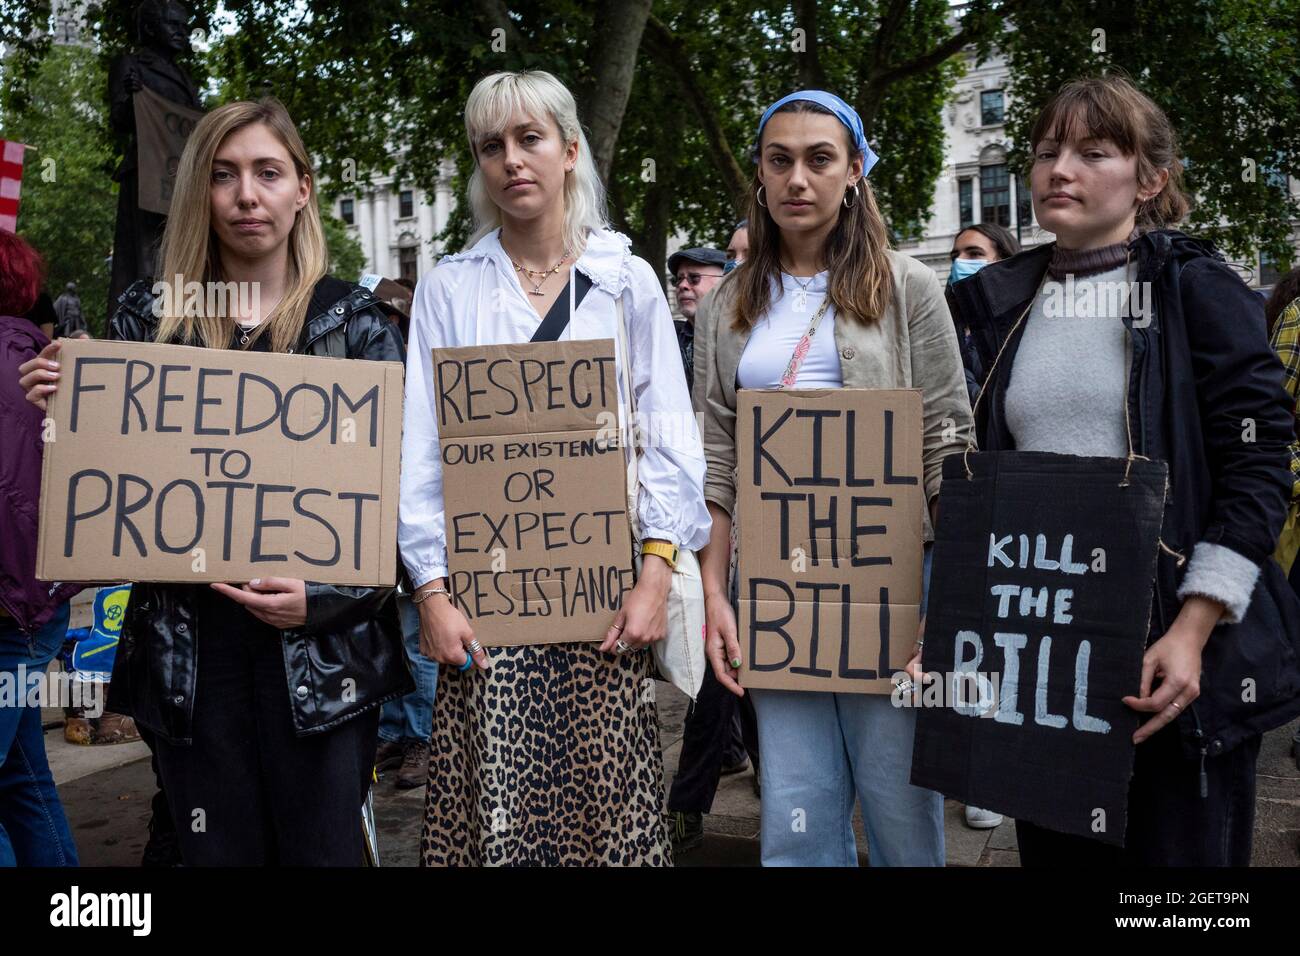 London, UK.  21 August 2021. Women with signs at a Kill the Bill protest in Parliament Square where people are campaigning against the Police, Crime, Sentencing and Courts Bill Government Bill.  Members of climate activists Extinction Rebellion (XR) are also present ahead of reported climate protests targeting the City of London next week.  Credit: Stephen Chung / Alamy Live News Stock Photo